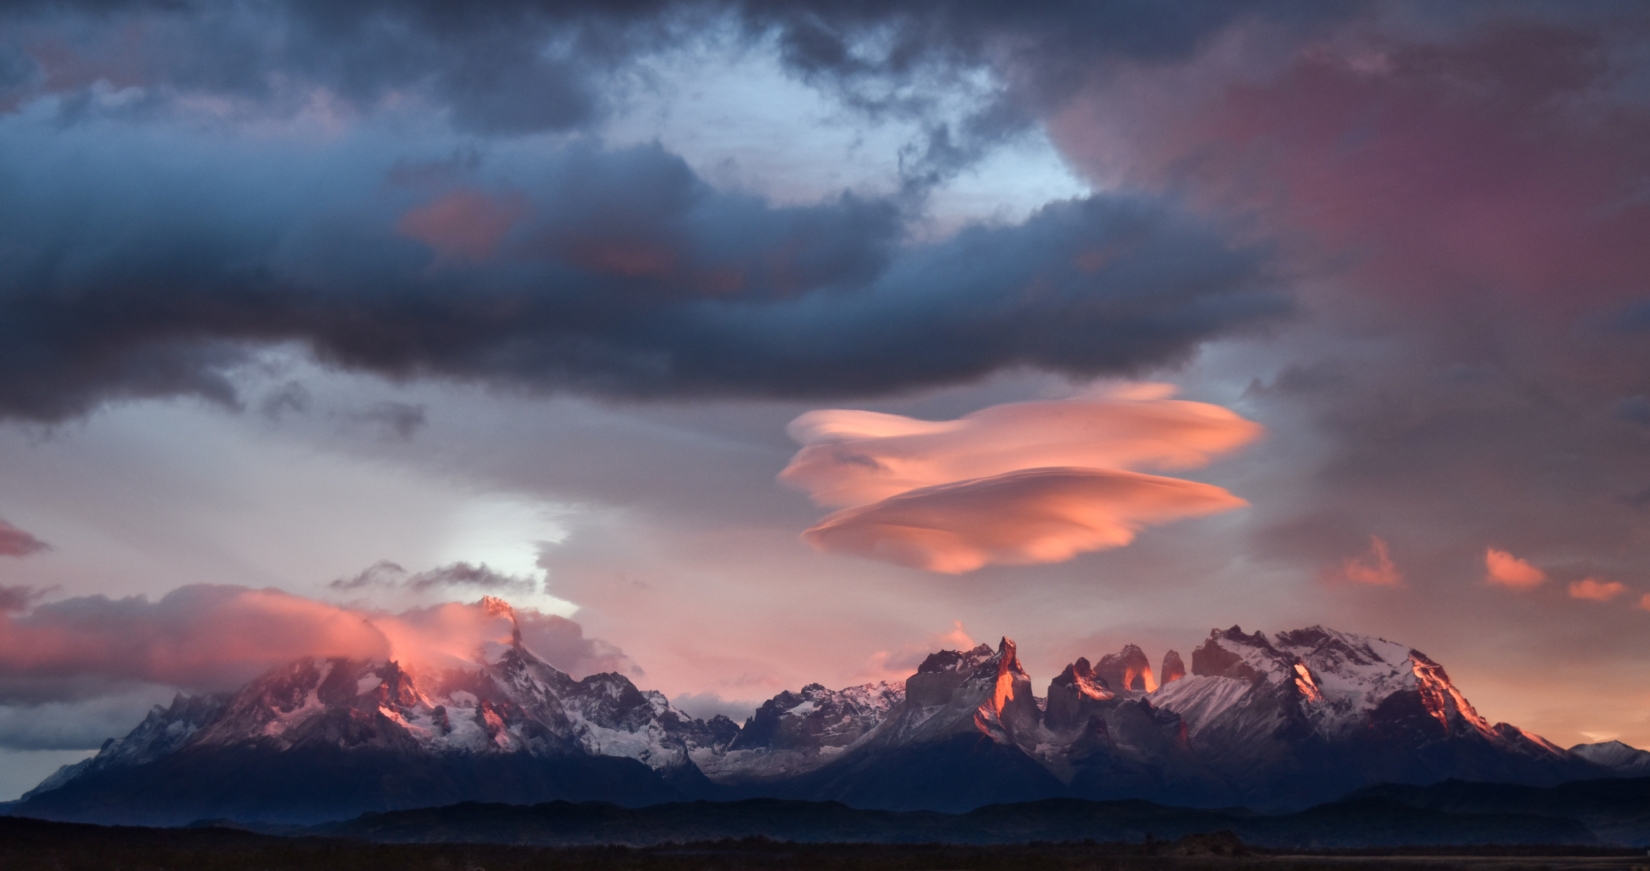 A sunset over Torres del Paine National Park in Patagonia, Chile